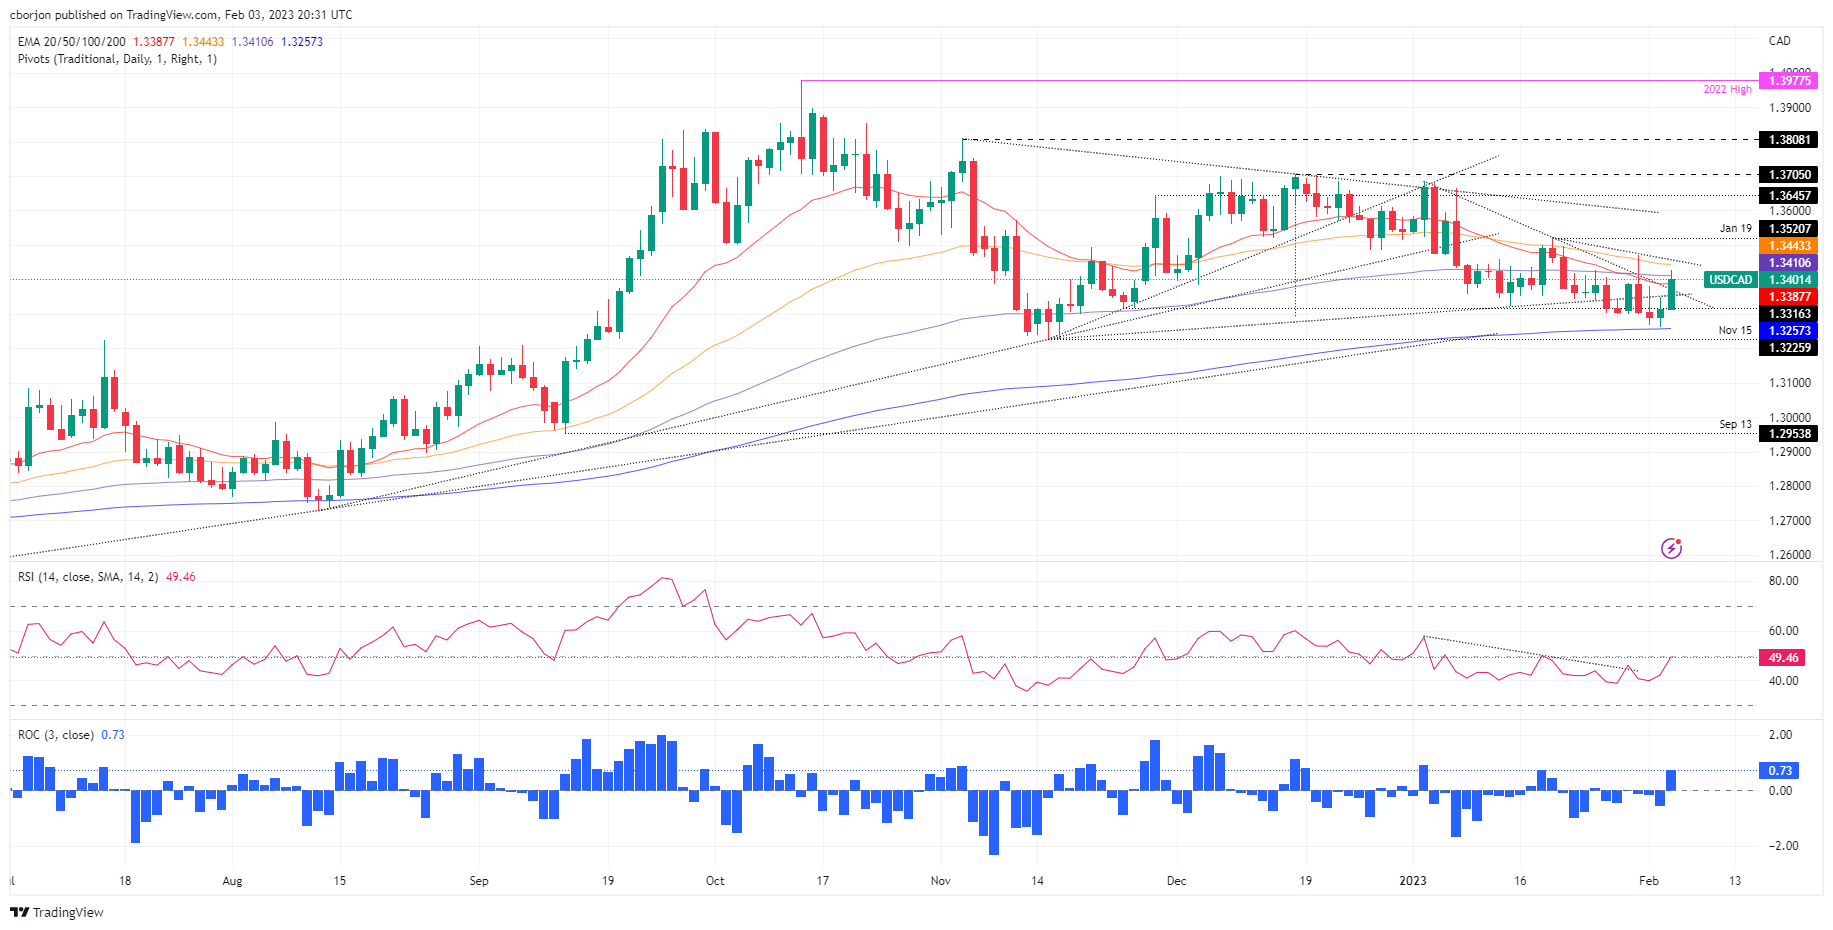 USD/CAD Price Analysis: Breaks through 50-day EMA resistance